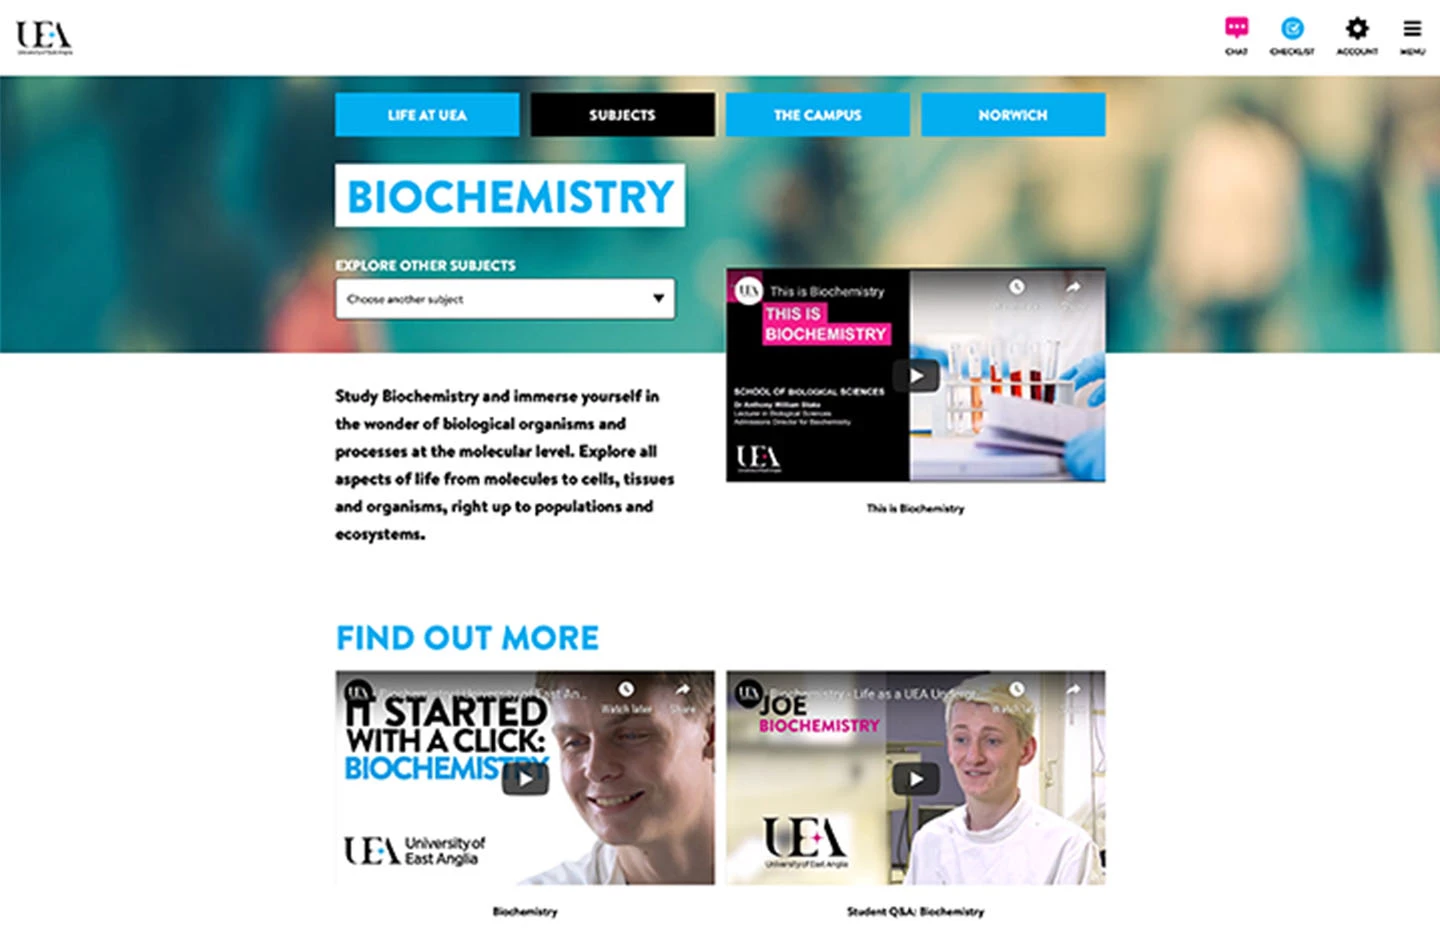 Biochemistry page from the UEA website